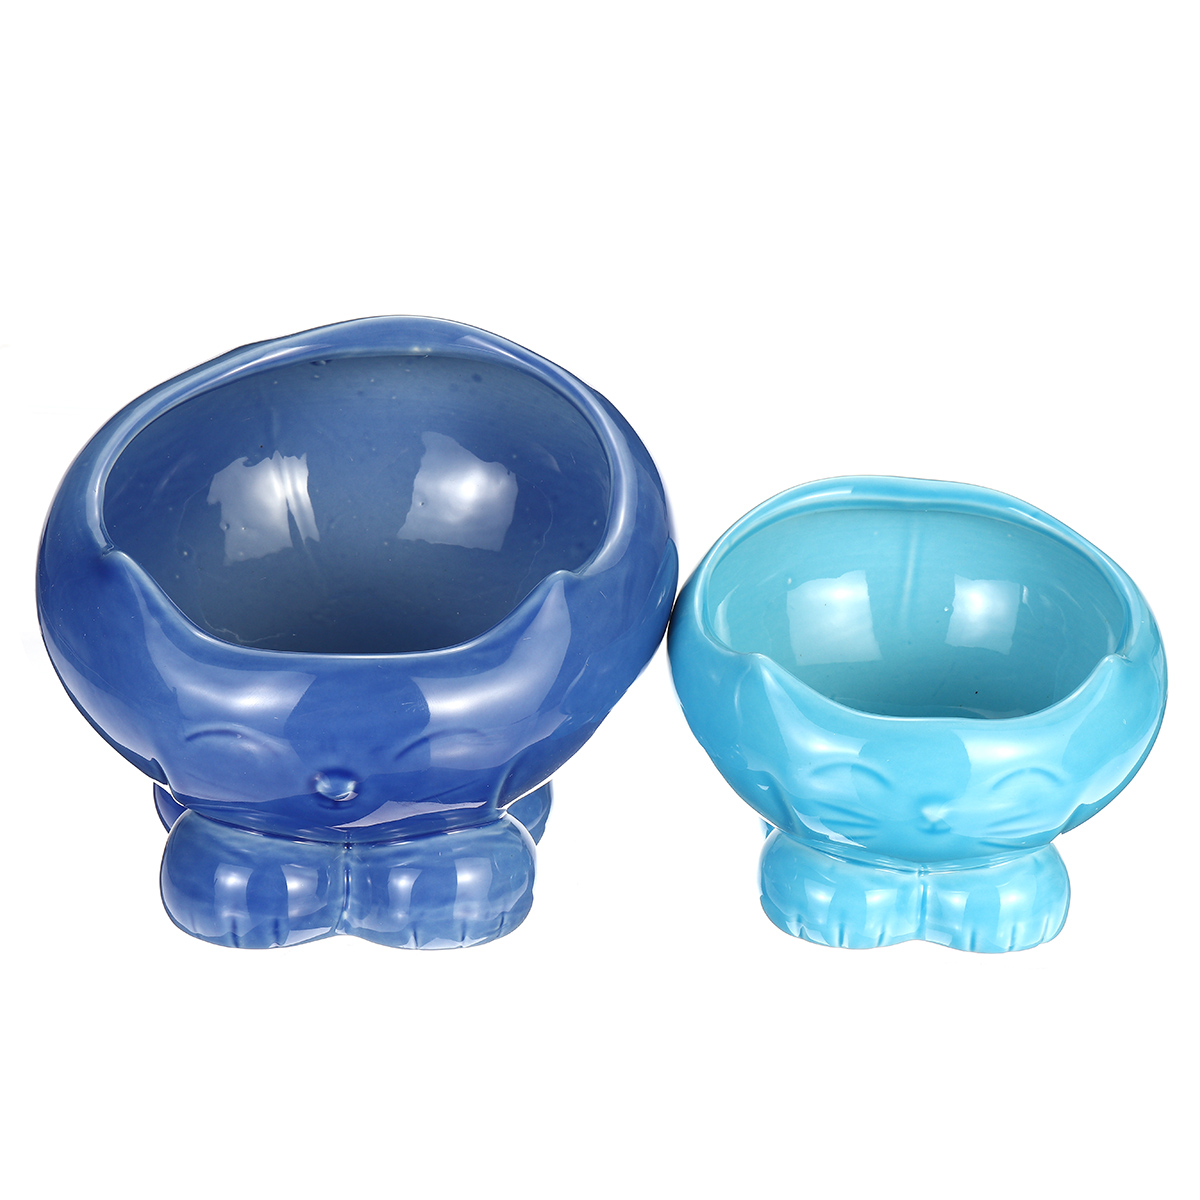 Cats-Feeding-Pet-Bowl-Food-Ceramic-Bowl-Puppy-Dogs-Snack-Water-Feeder-1691894-10